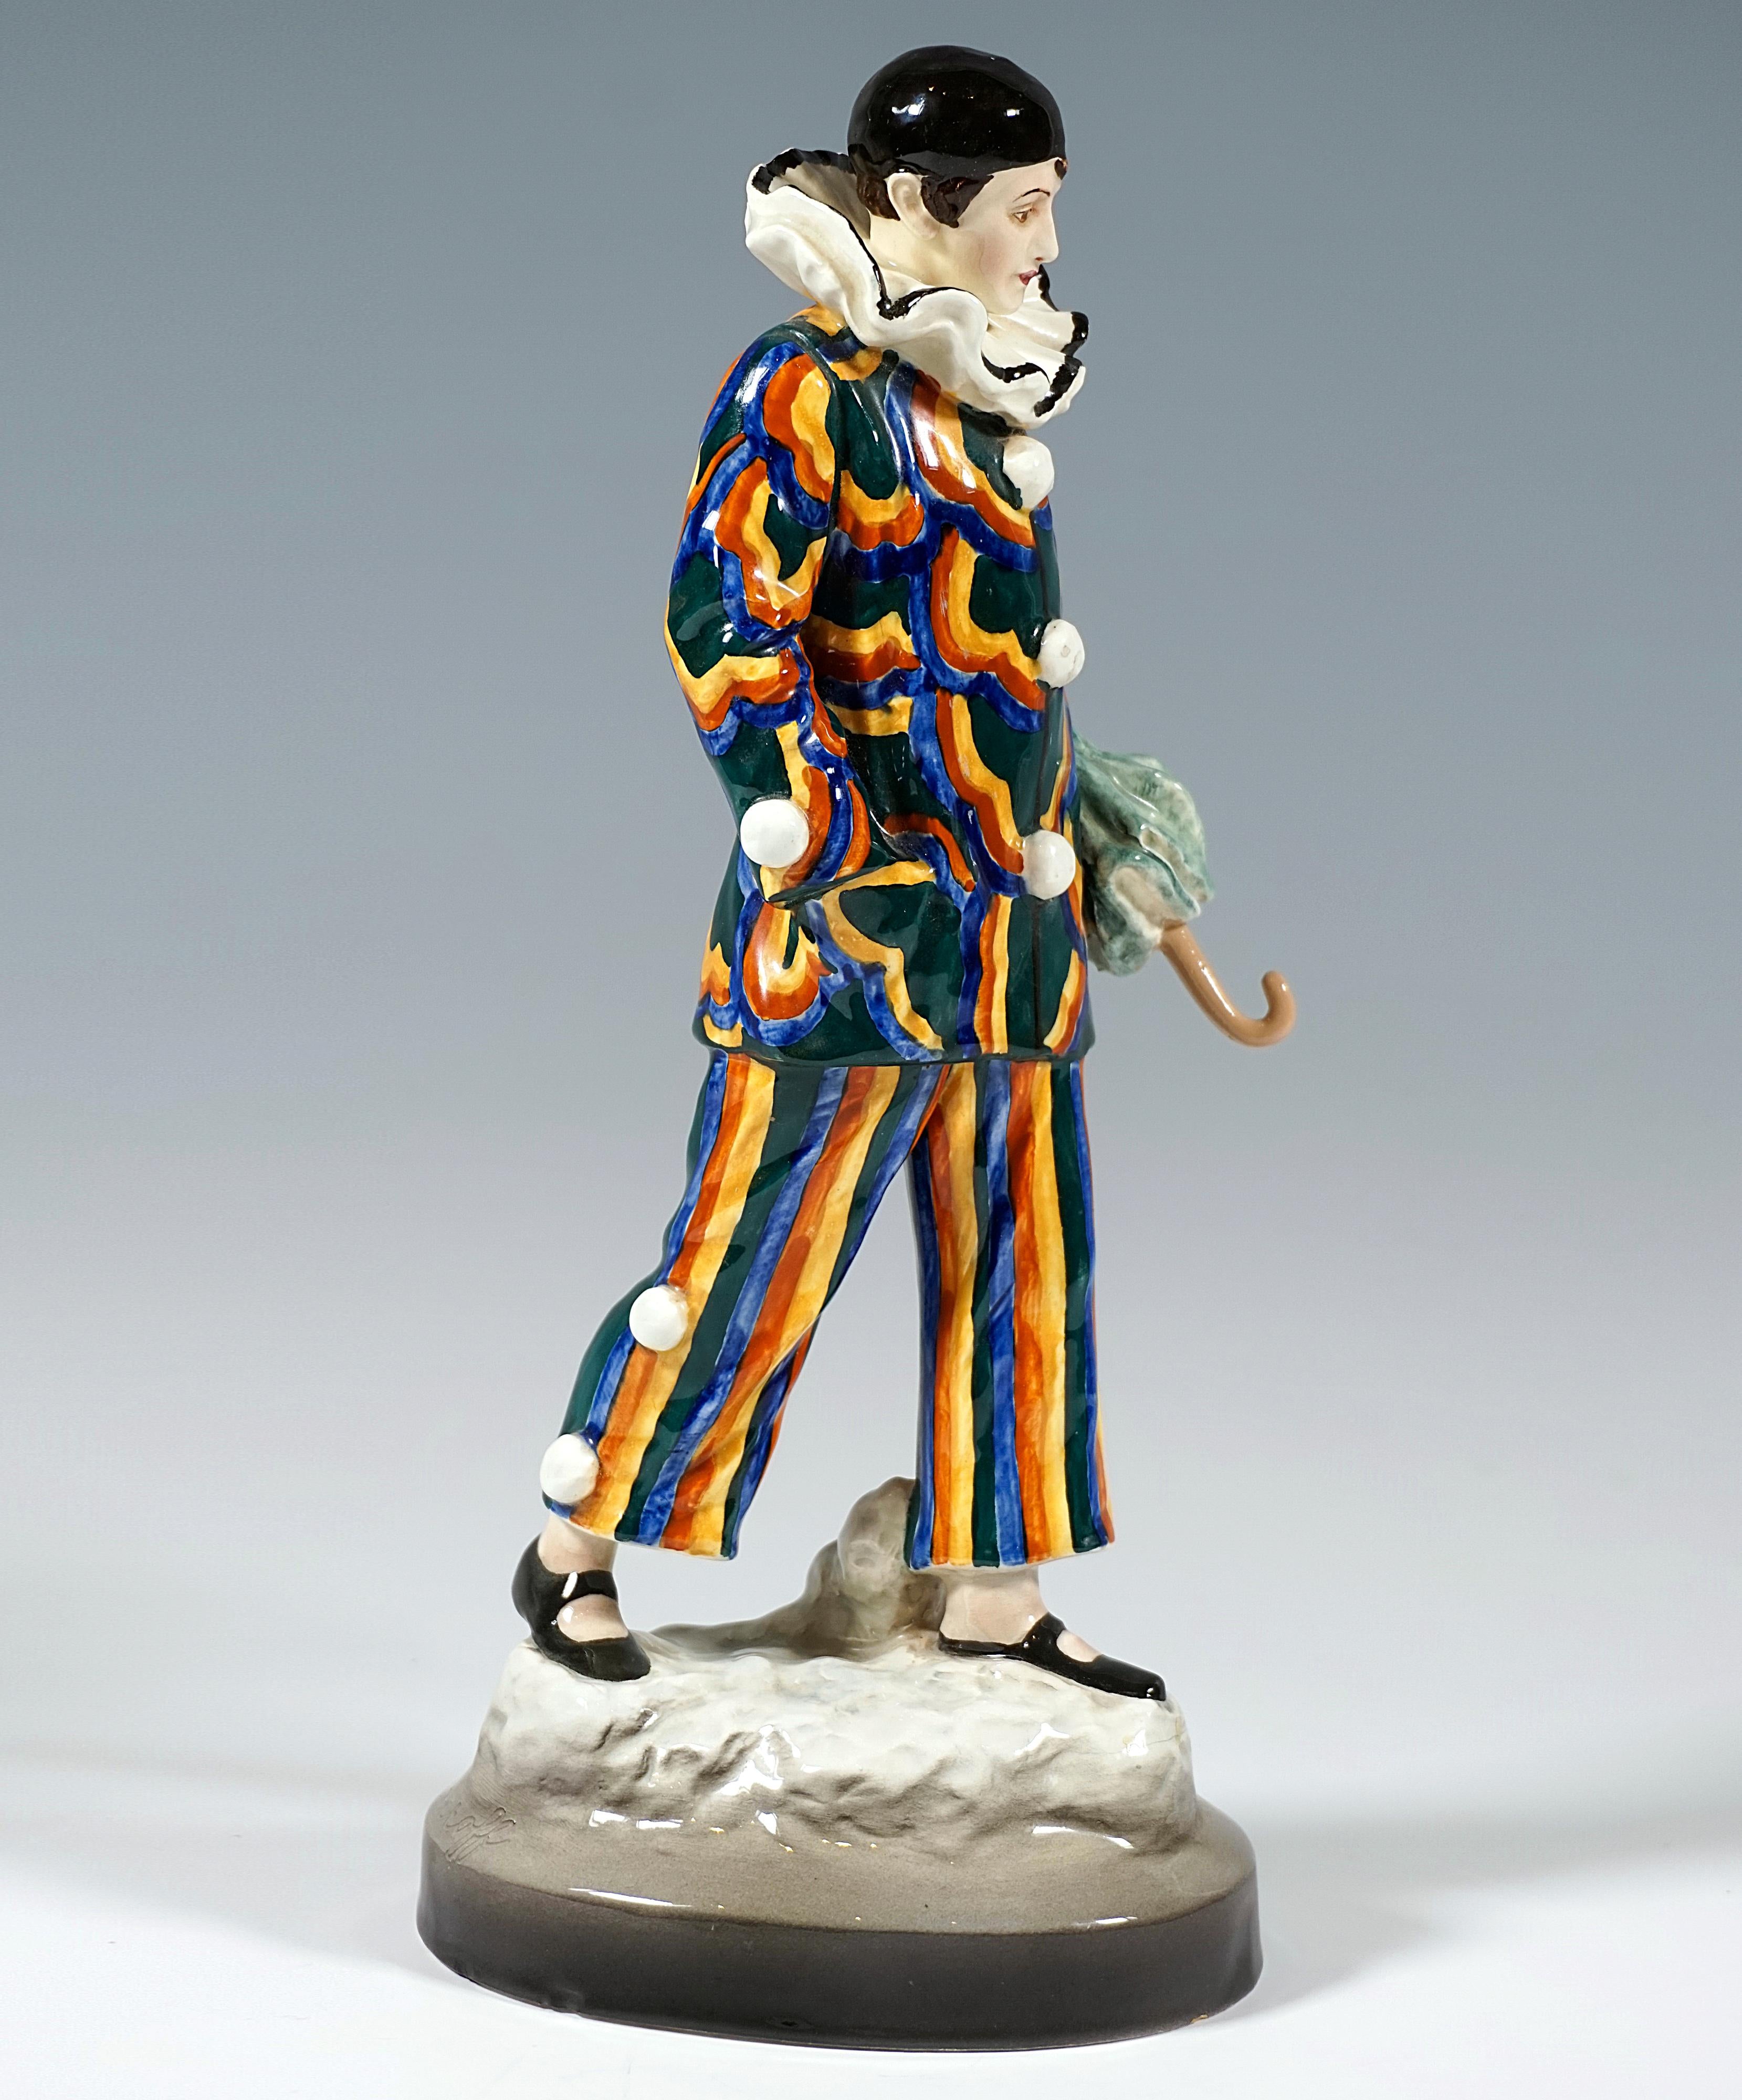 Exceptional Goldscheider Figurine of the 1920s after an Art Nouveau Design:Depiction of a harlequin striding lost in thought in a costume with colorful striped pants and wide jacket decorated with large stylized floral decoration with white tassel